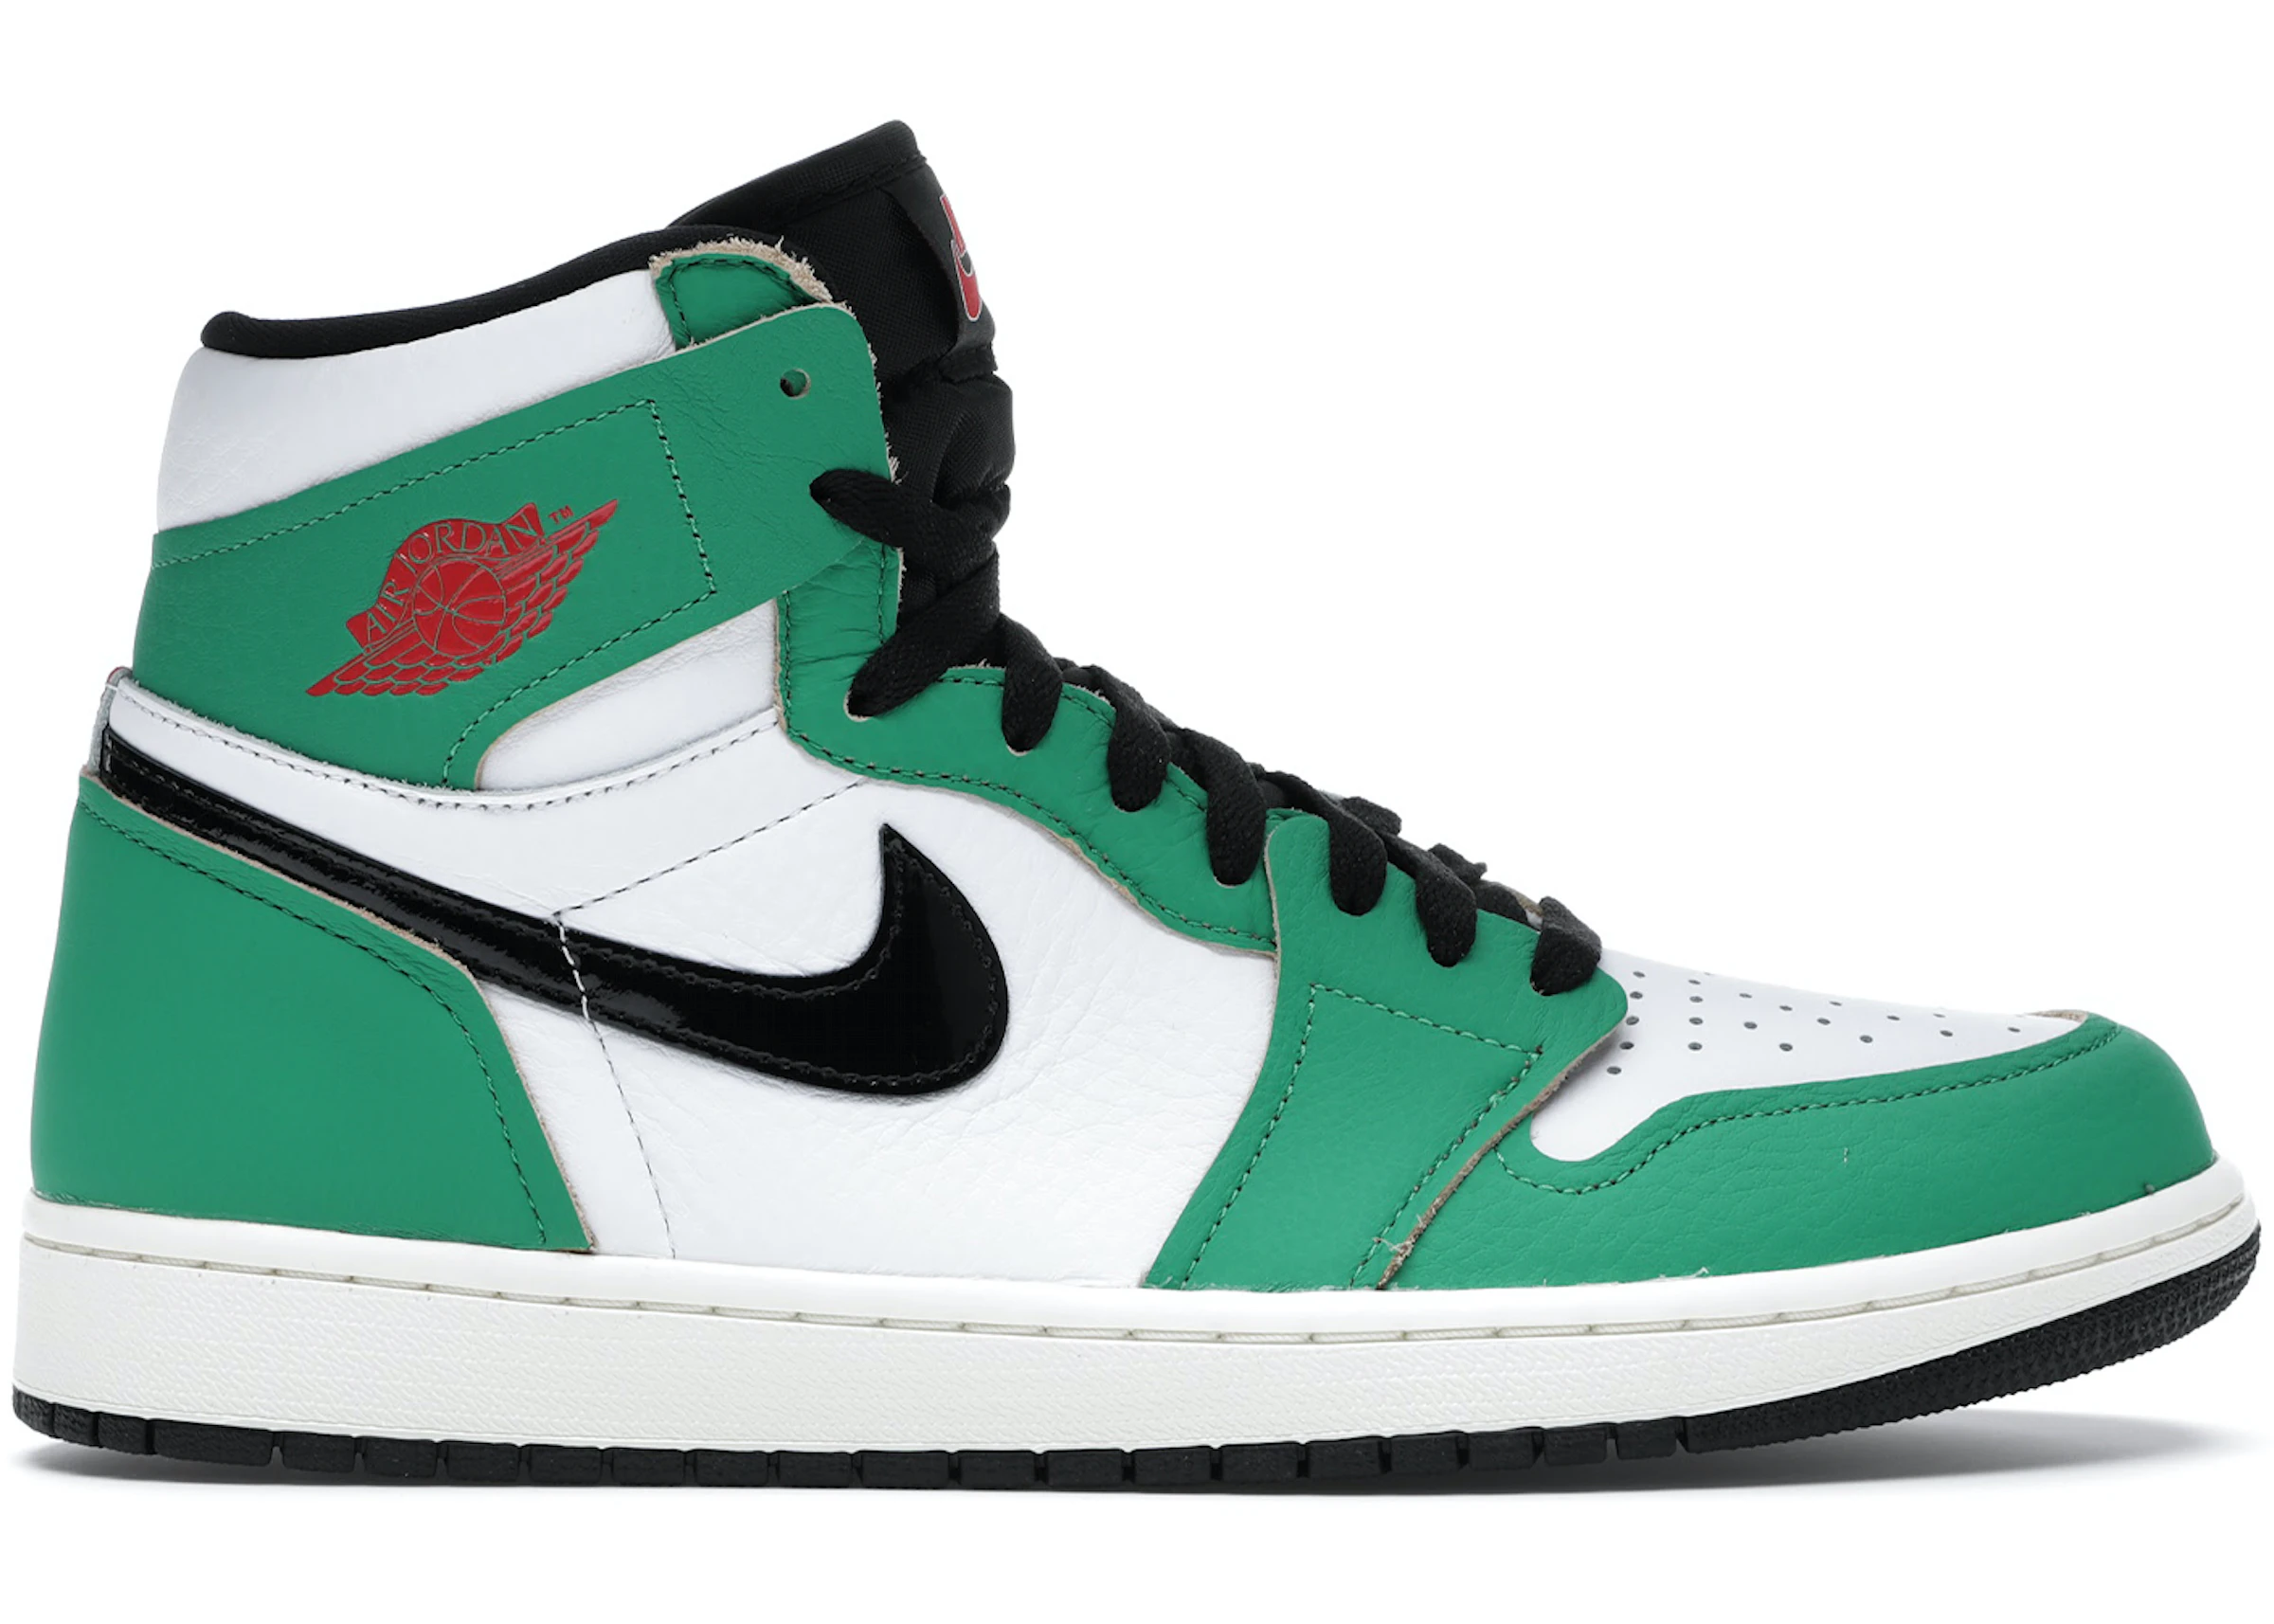 waterfall Do not do it Clean the room Jordan 1 Retro High Lucky Green (W) - DB4612-300 - US